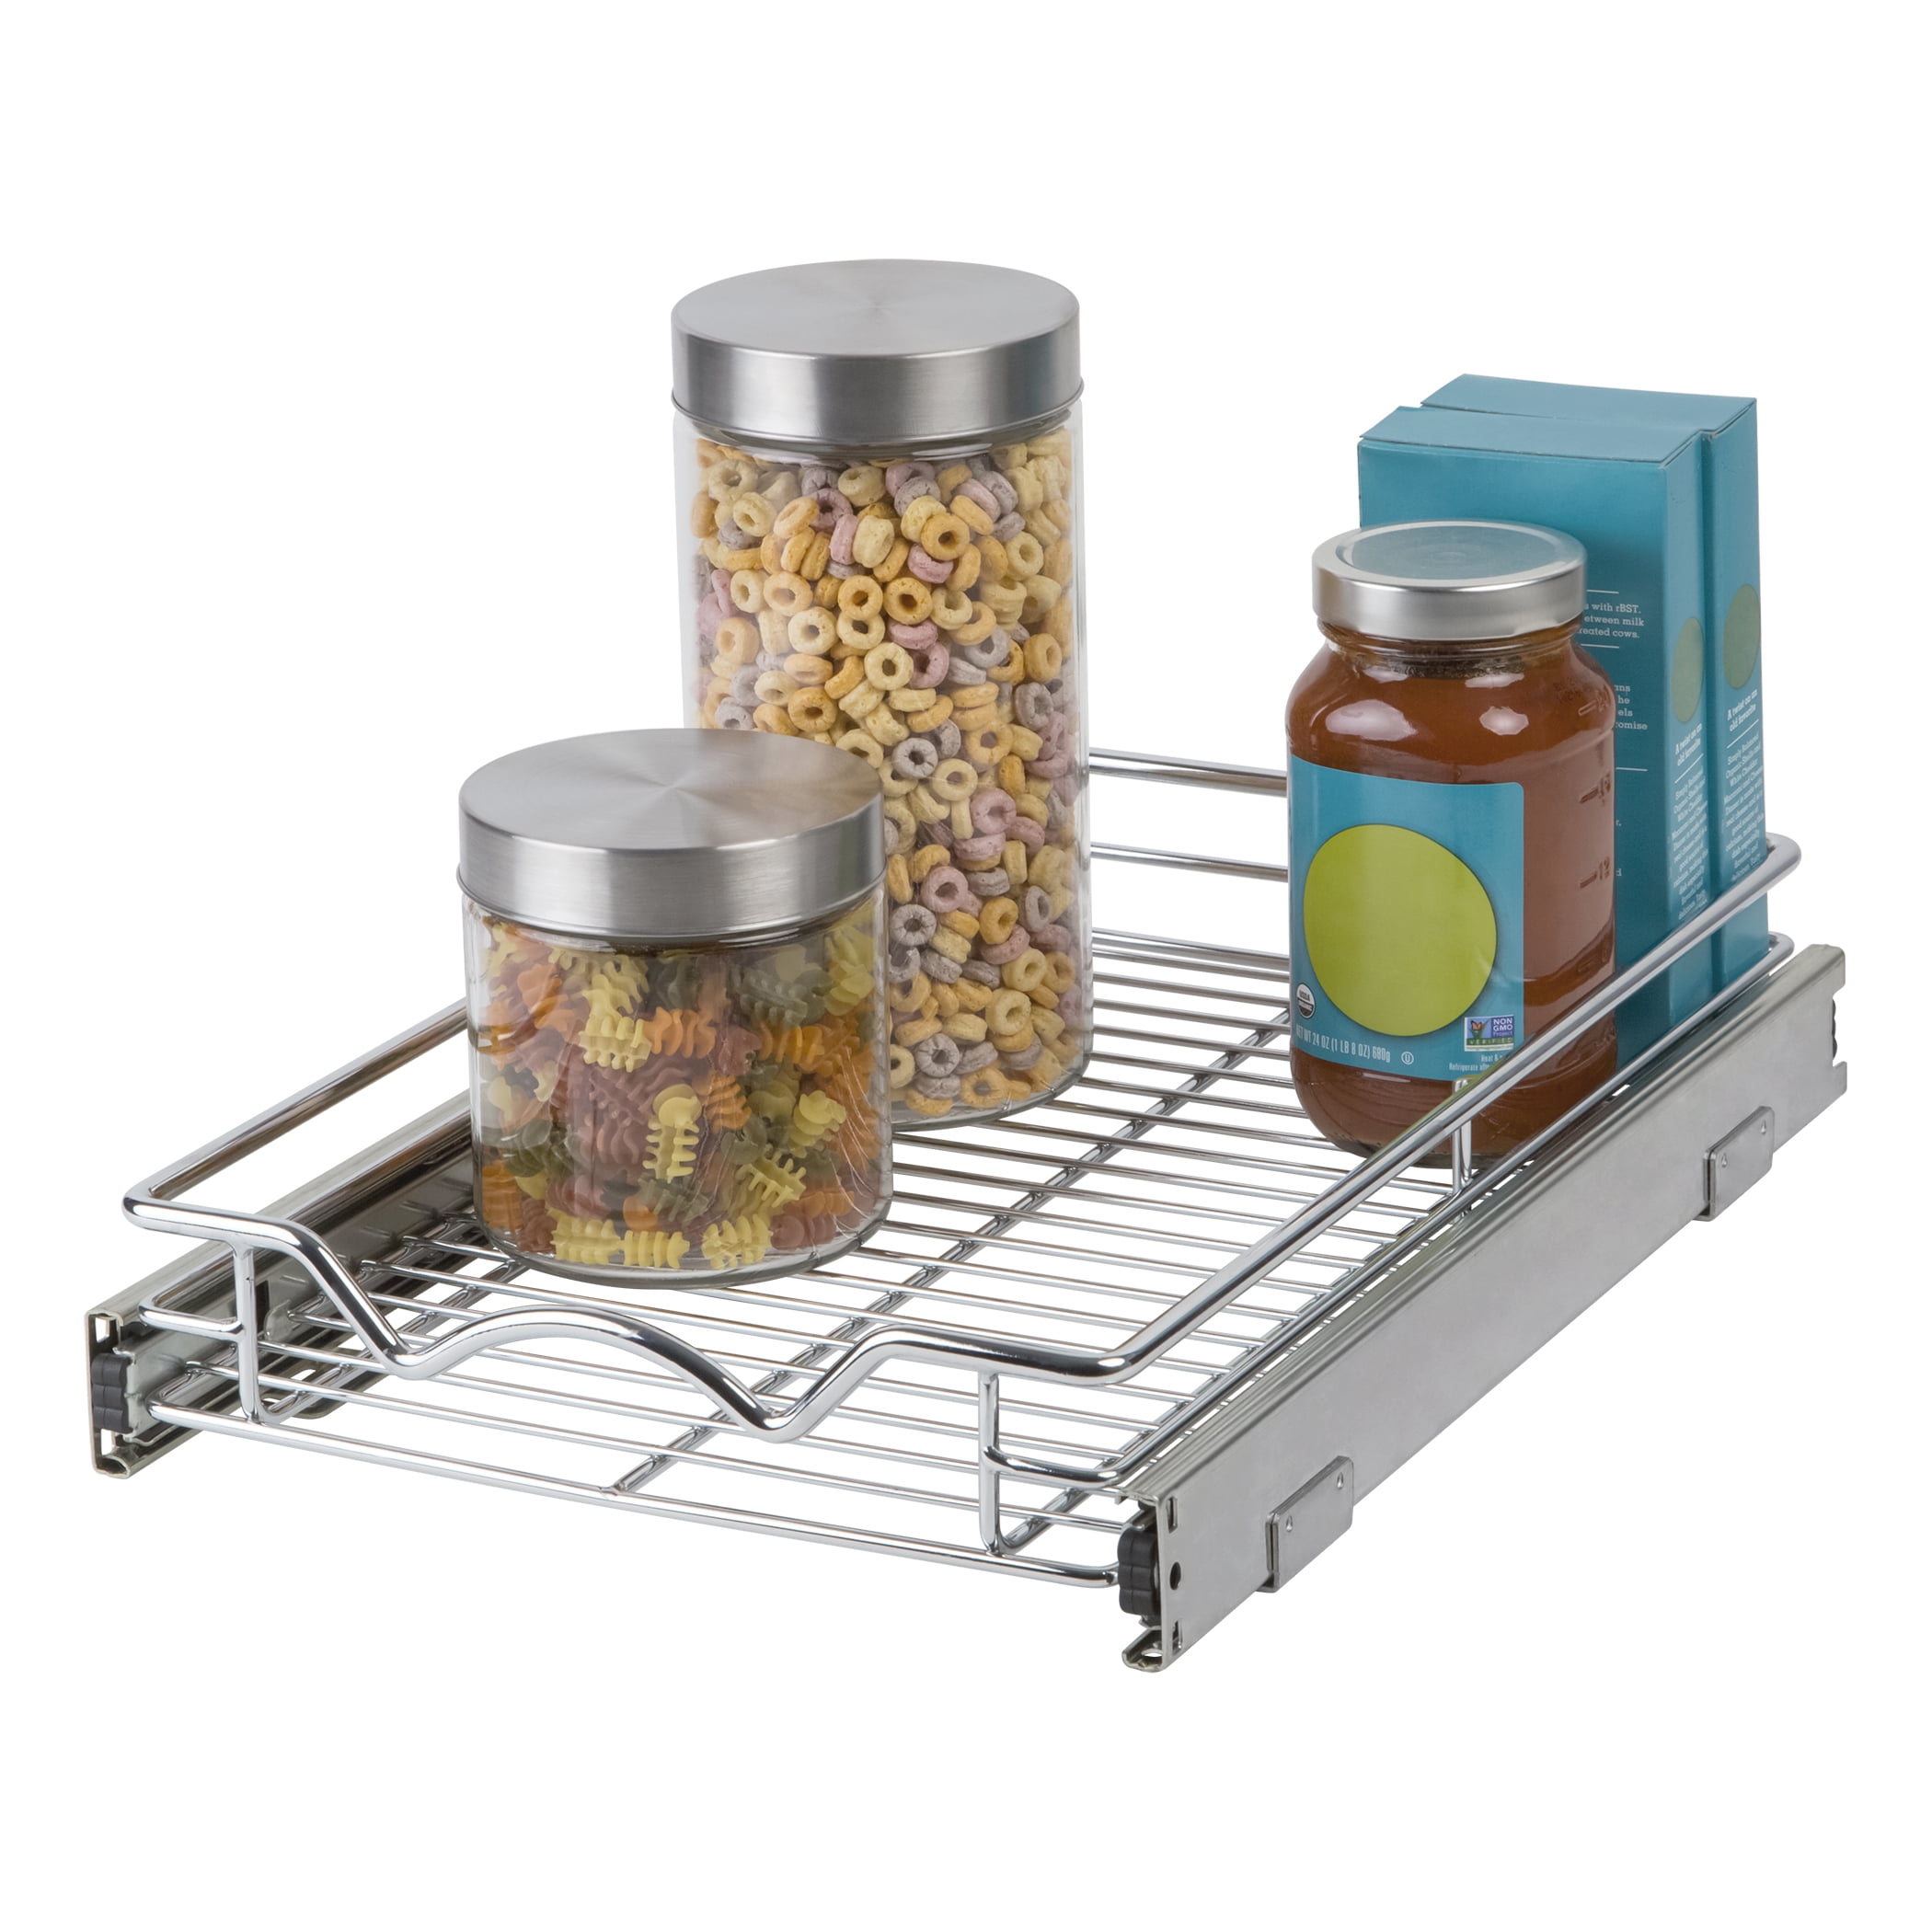 HOLDN’ STORAGE Pull Out Spice Rack Organizer for Cabinet, Heavy  Duty-5 Year Limited Warranty-Slide